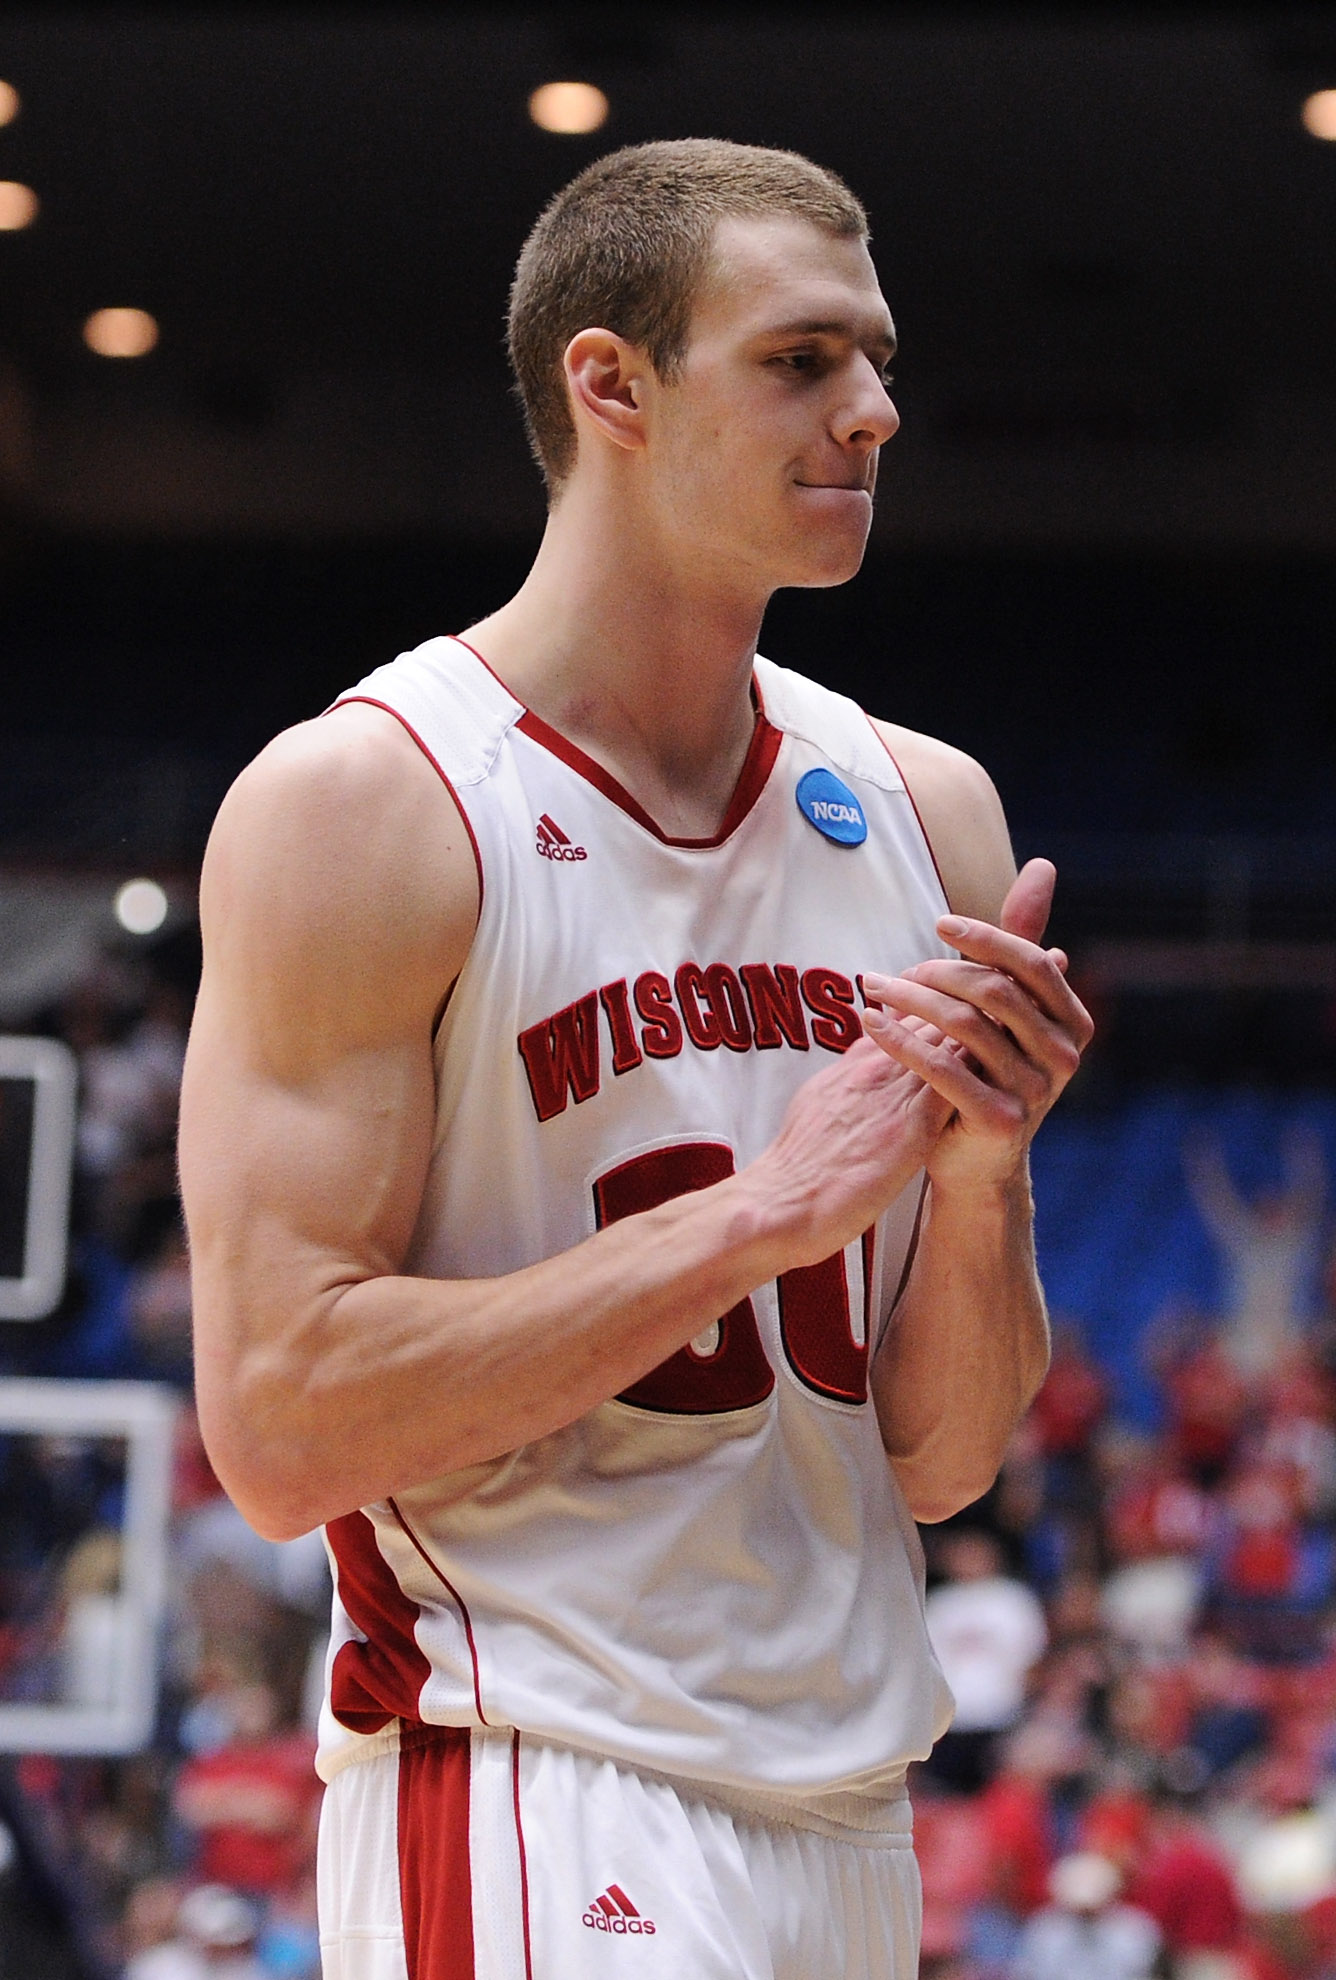 TUCSON, AZ - MARCH 19:  Jon Leuer #30 of the Wisconsin Badgers celebrates during their game against the Kansas State Wildcats during the third round of the 2011 NCAA men's basketball tournament at McKale Center on March 19, 2011 in Tucson, Arizona.  (Phot